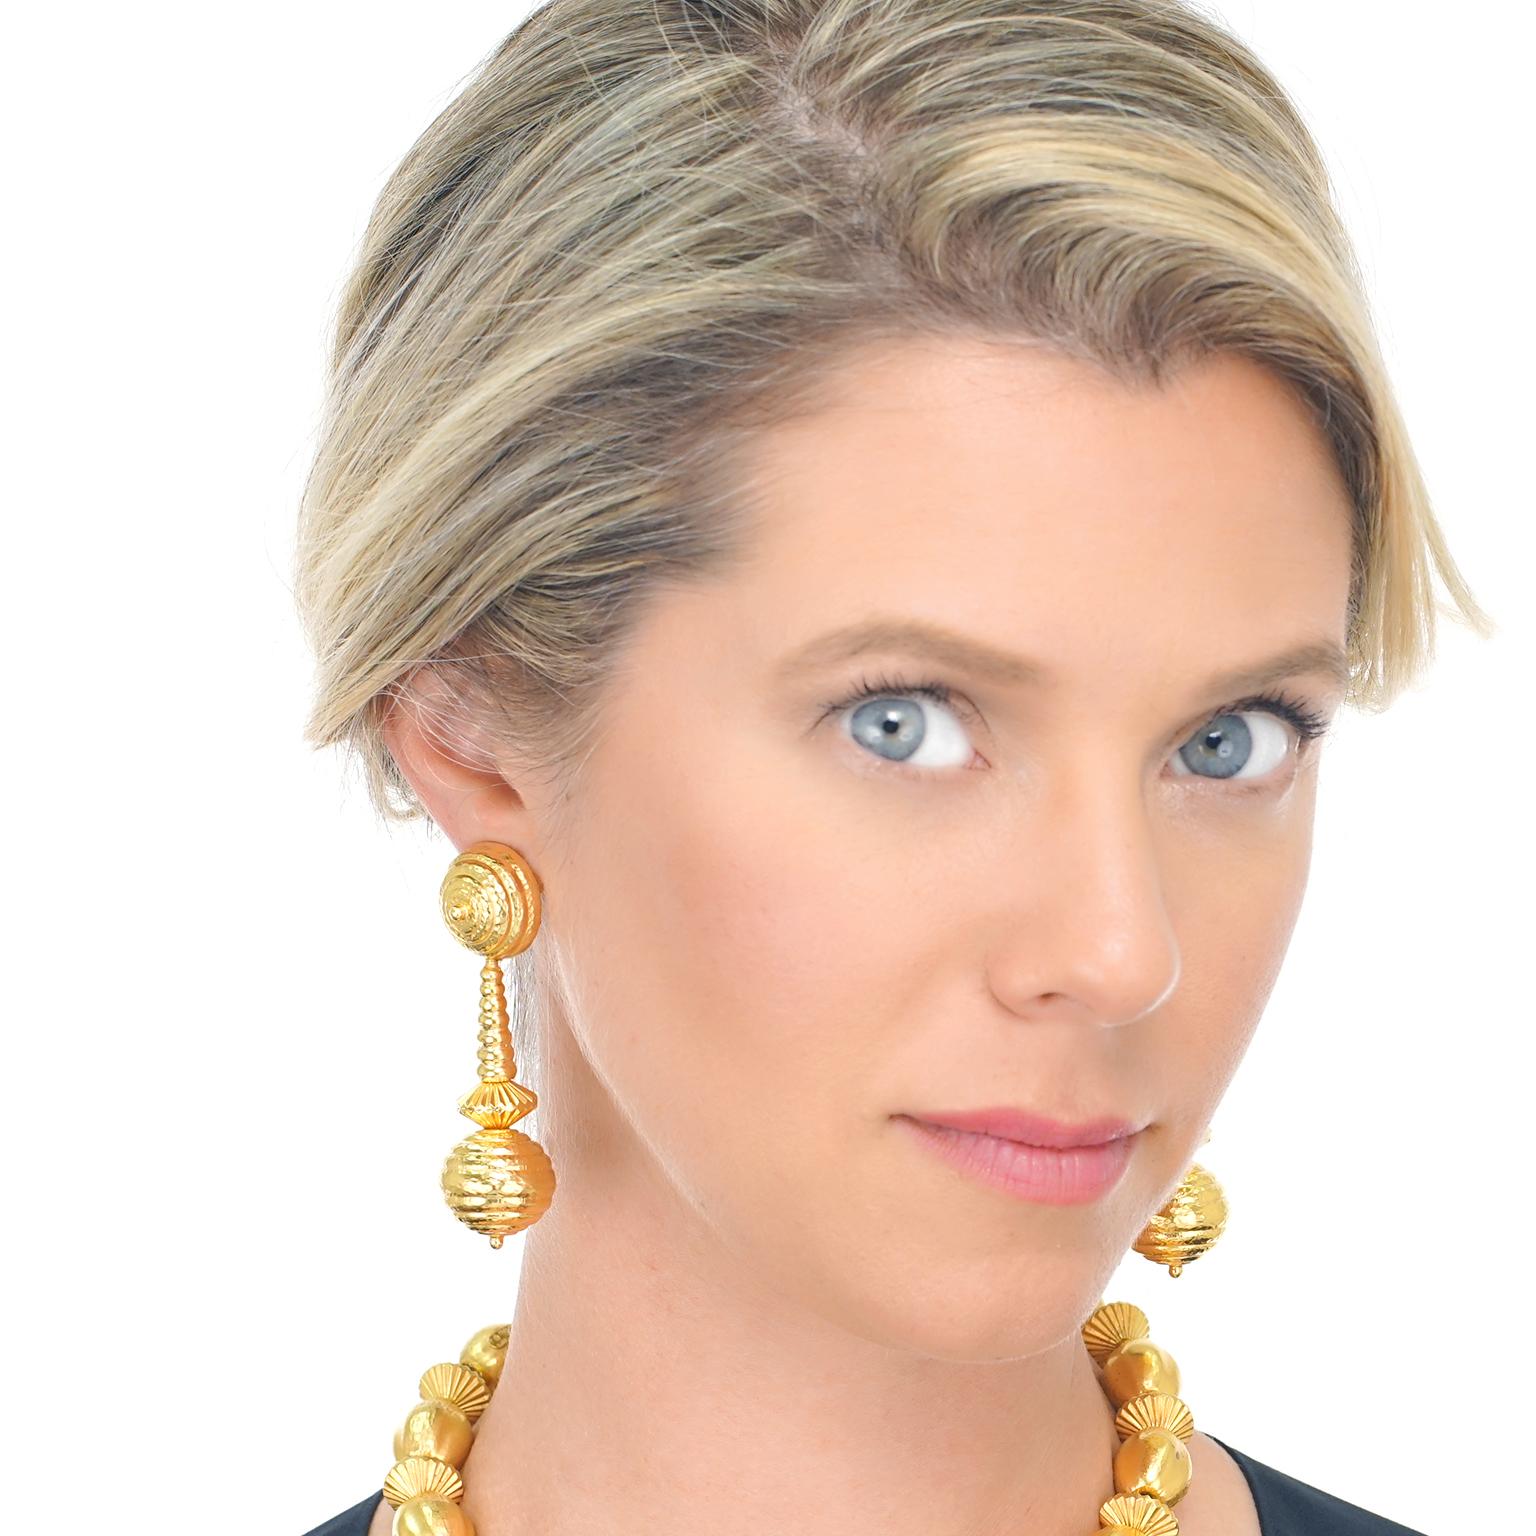 Circa 1960s, 22k, by Ilias Lalaounis, Greece.  These boldly stylish gold earrings by Lalaounis revive classic Mycenaean motifs for a look that is as chic as it is timeless. Ilias Lalaounis' vision to create jewelry based on classical, archaic, and